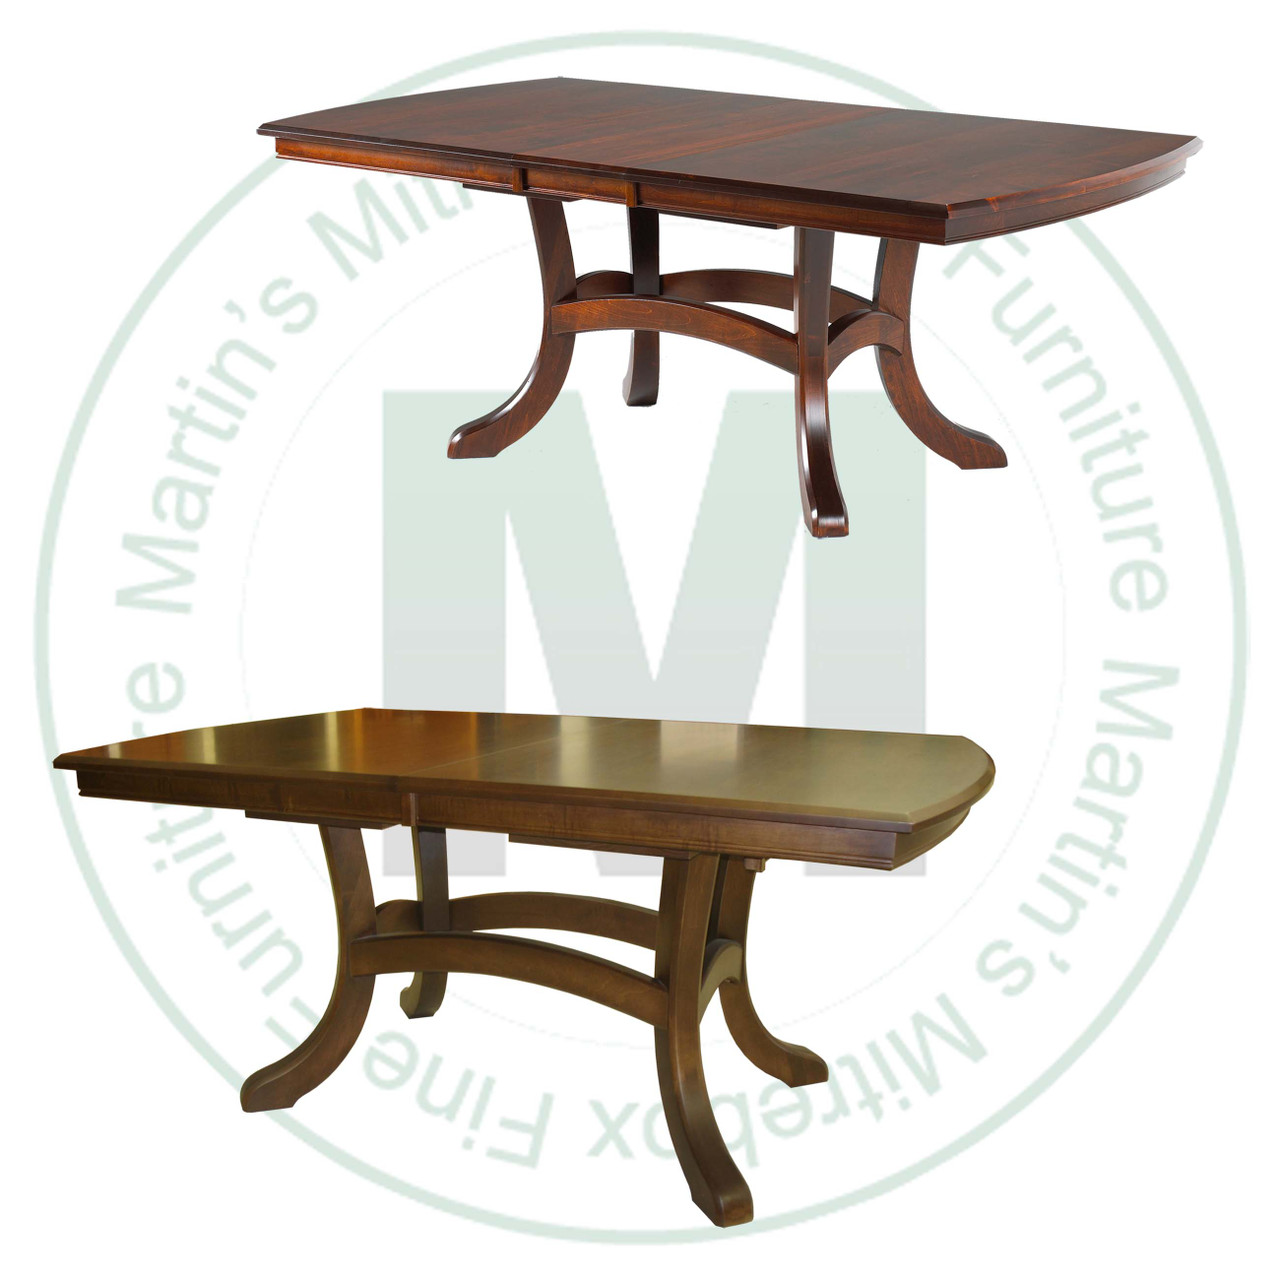 Oak Jordan Double Pedestal Table 42''D x 66''W x 30''H With 3 - 12'' Leaves. Table Has 1.25'' Thick Top